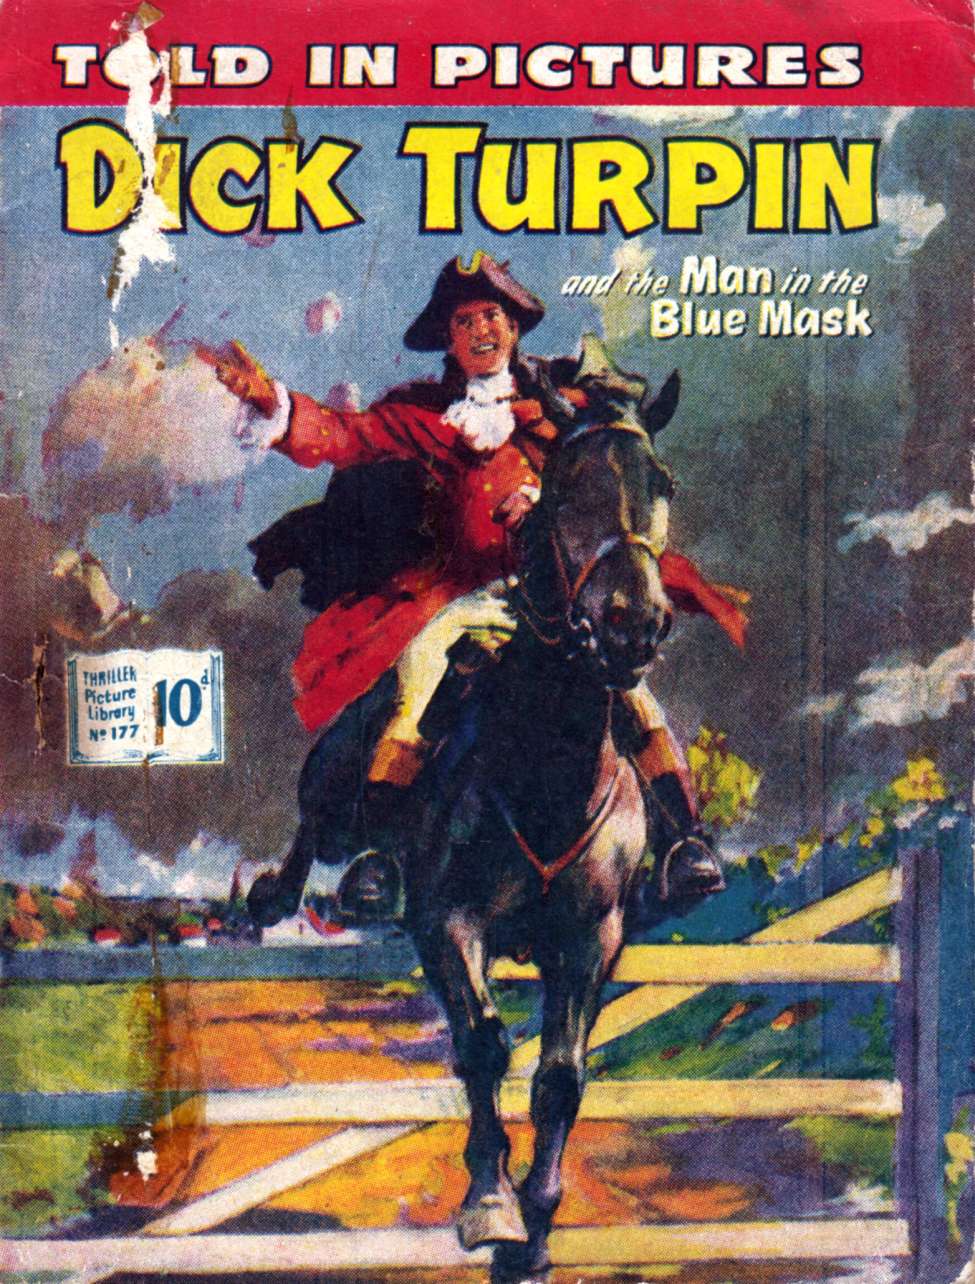 Book Cover For Thriller Picture Library 177 - Dick Turpin